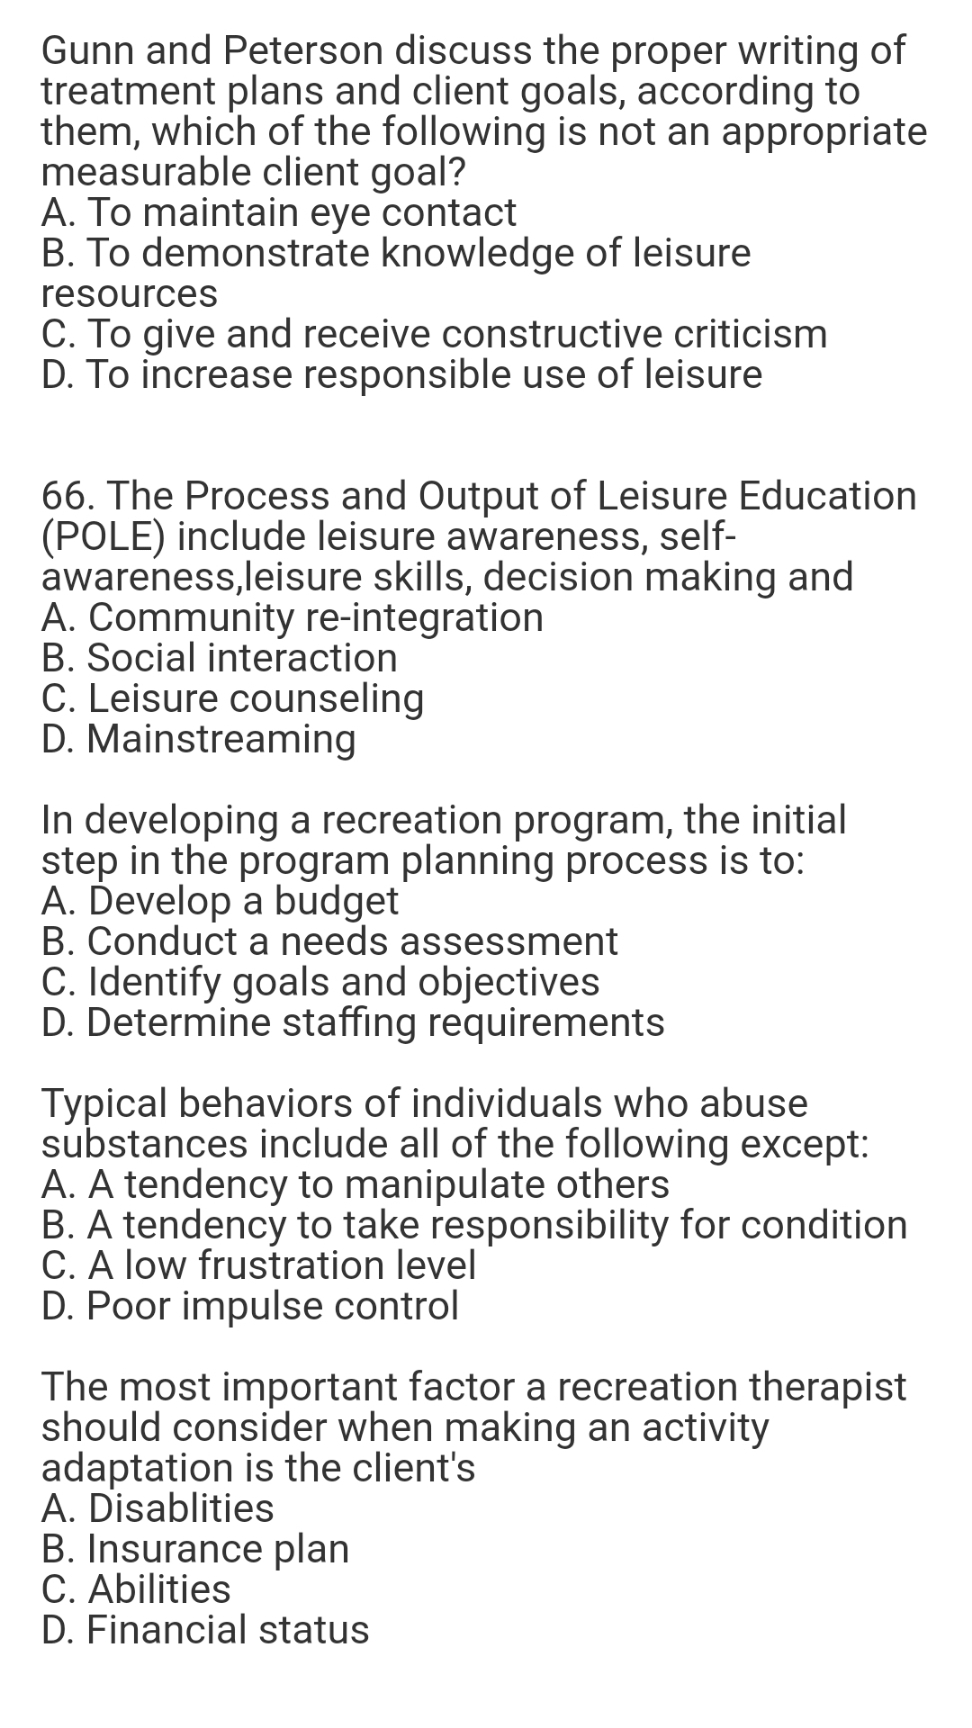 Gunn and Peterson discuss the proper writing of
treatment plans and client goals, according to
them, which of the following is not an appropriate
measurable client goal?
A. To maintain eye contact
B. To demonstrate knowledge of leisure
resources
C. To give and receive constructive criticism
D. To increase responsible use of leisure
66. The Process and Output of Leisure Education
(POLE) include leisure awareness, self-
awareness,leisure skills, decision making and
A. Community re-integration
B. Social interaction
C. Leisure counseling
D. Mainstreaming
In developing a recreation program, the initial
step in the program planning process is to:
A. Ďevelop a budget
B. Conduct a needs assessment
C. Identify goals and objectives
D. Determine staffing requirements
Typical behaviors of individuals who abuse
substances include all of the following except:
A. A tendency to manipulate others
B. A tendency to take responsibility for condition
C. A low frustration level
D. Poor impulse control
The most important factor a recreation therapist
should consider when making an activity
adaptation is the client's
A. Disablities
B. Insurance plan
C. Abilities
D. Financial status
